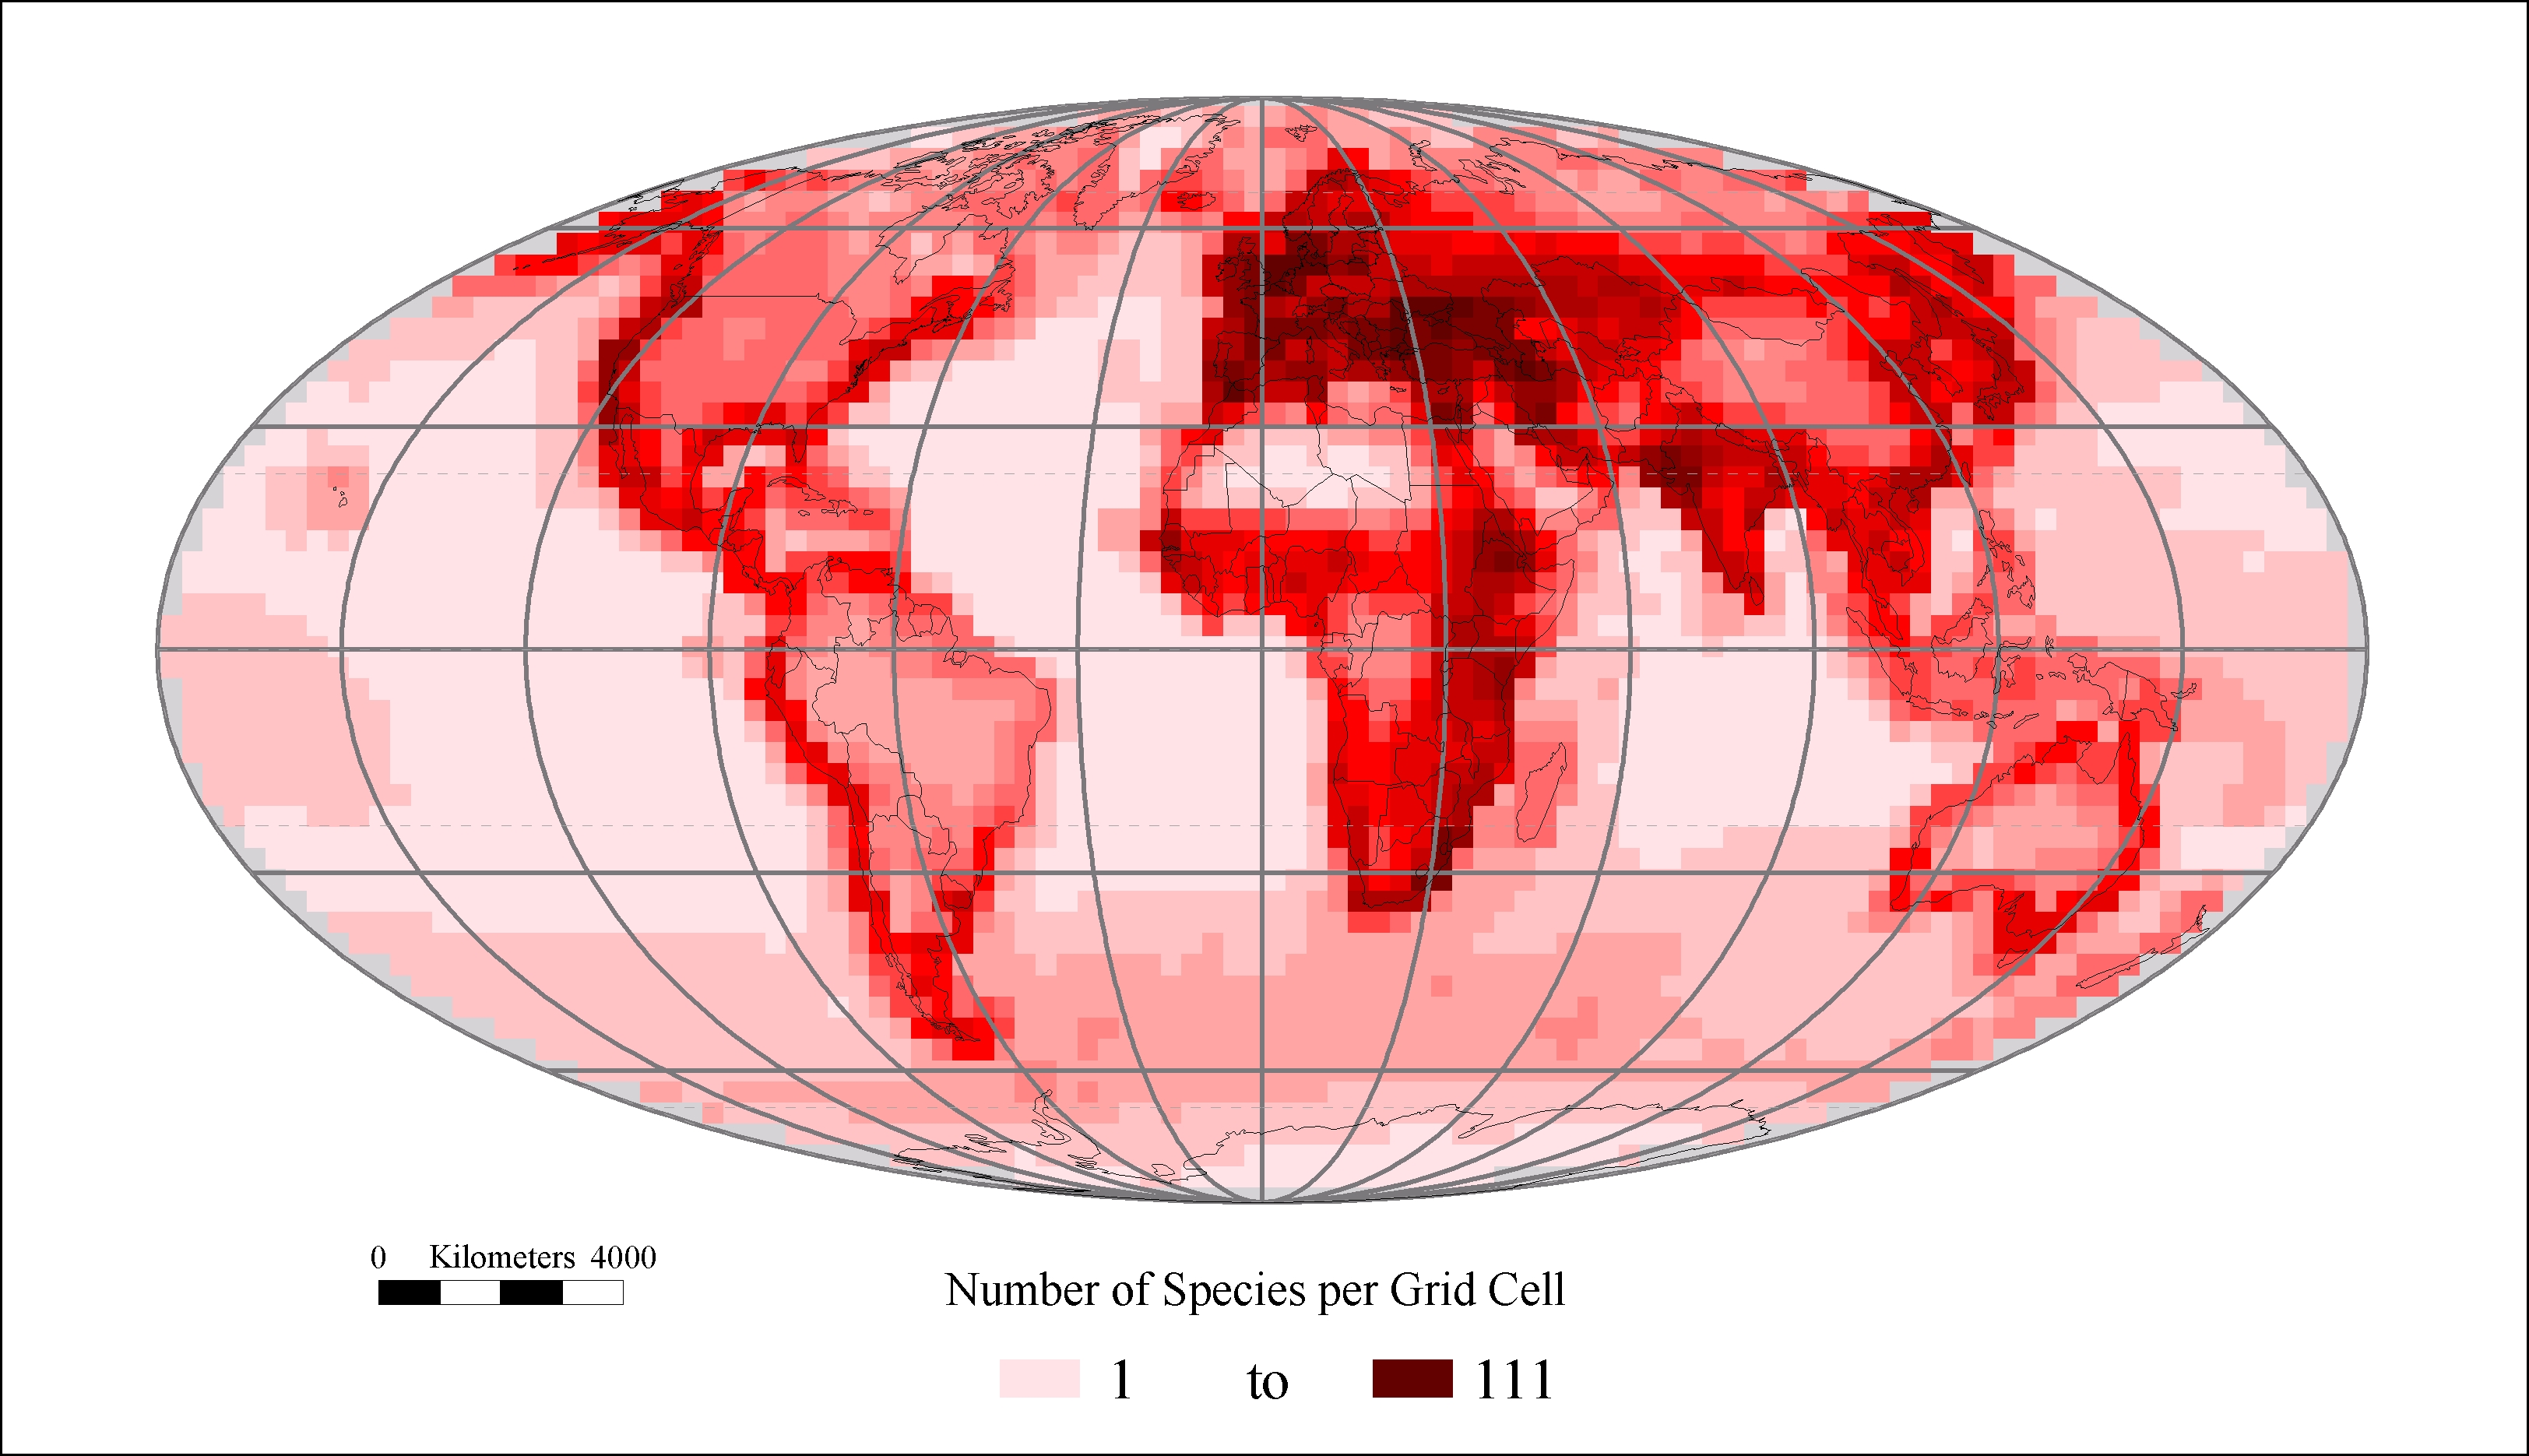 Number of species per grid cell